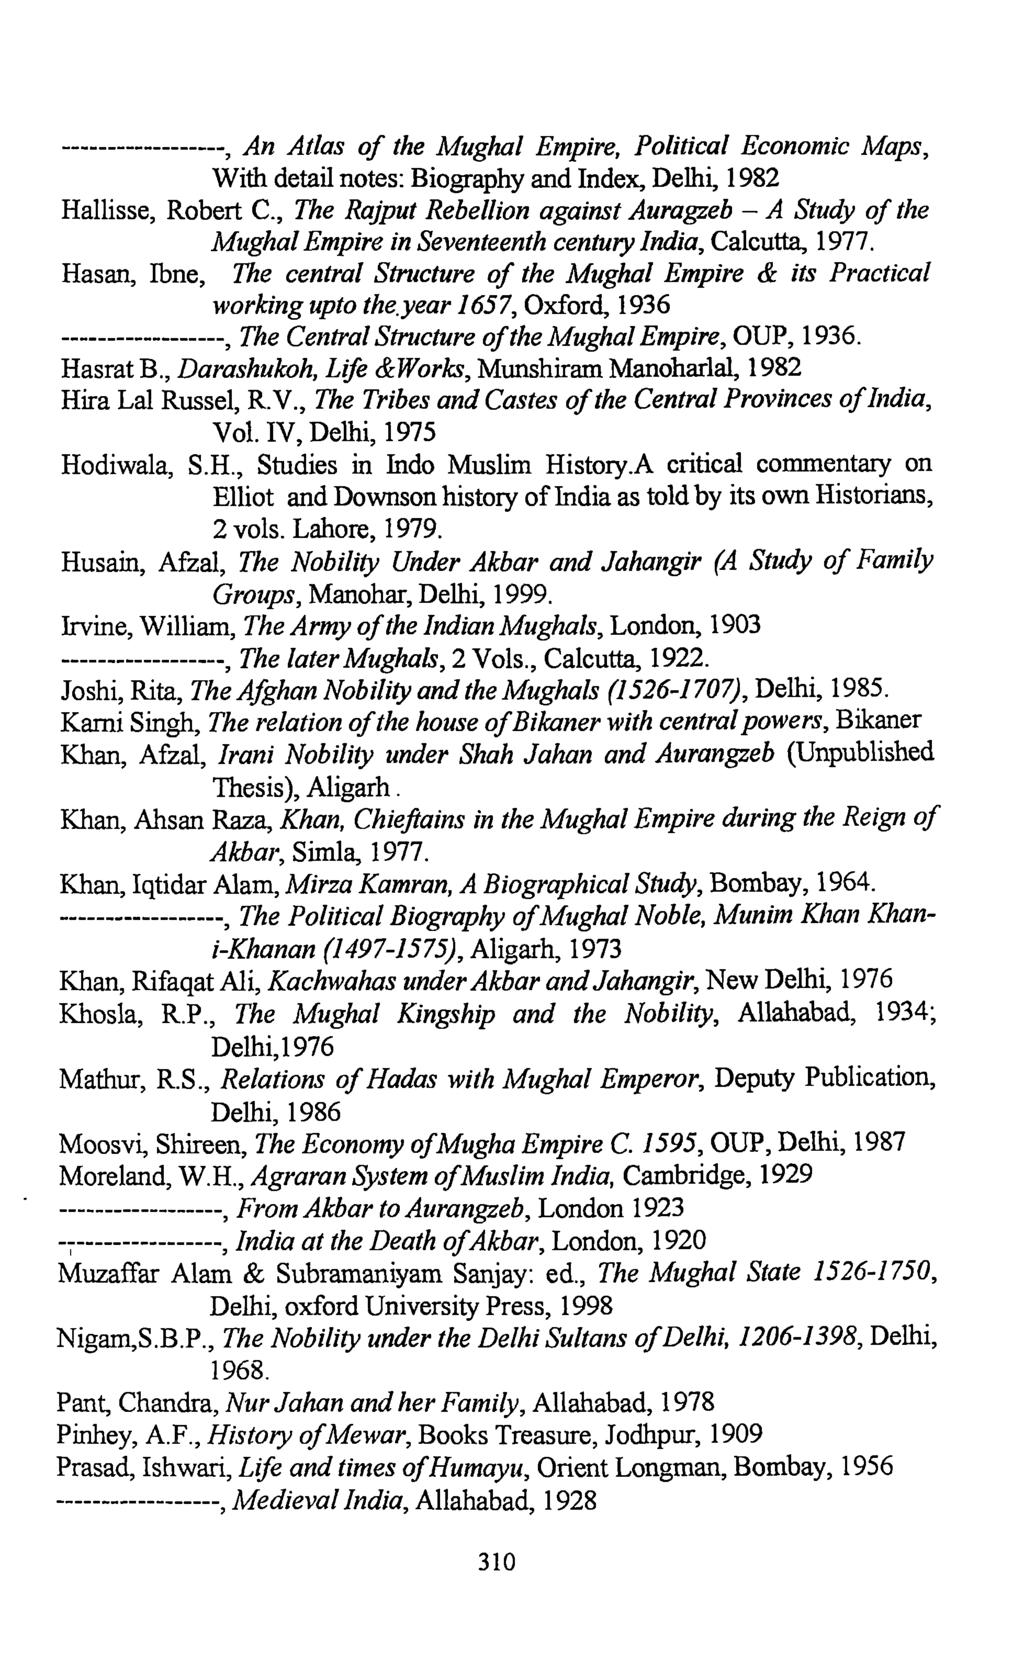 ^ j^n Atlas of the Mughal Empire, Political Economic Maps, With detail notes: Biography and Index, Delhi, 1982 Hallisse, Robert C, The Rajput Rebellion against Auragzeb - A Study of the Mughal Empire